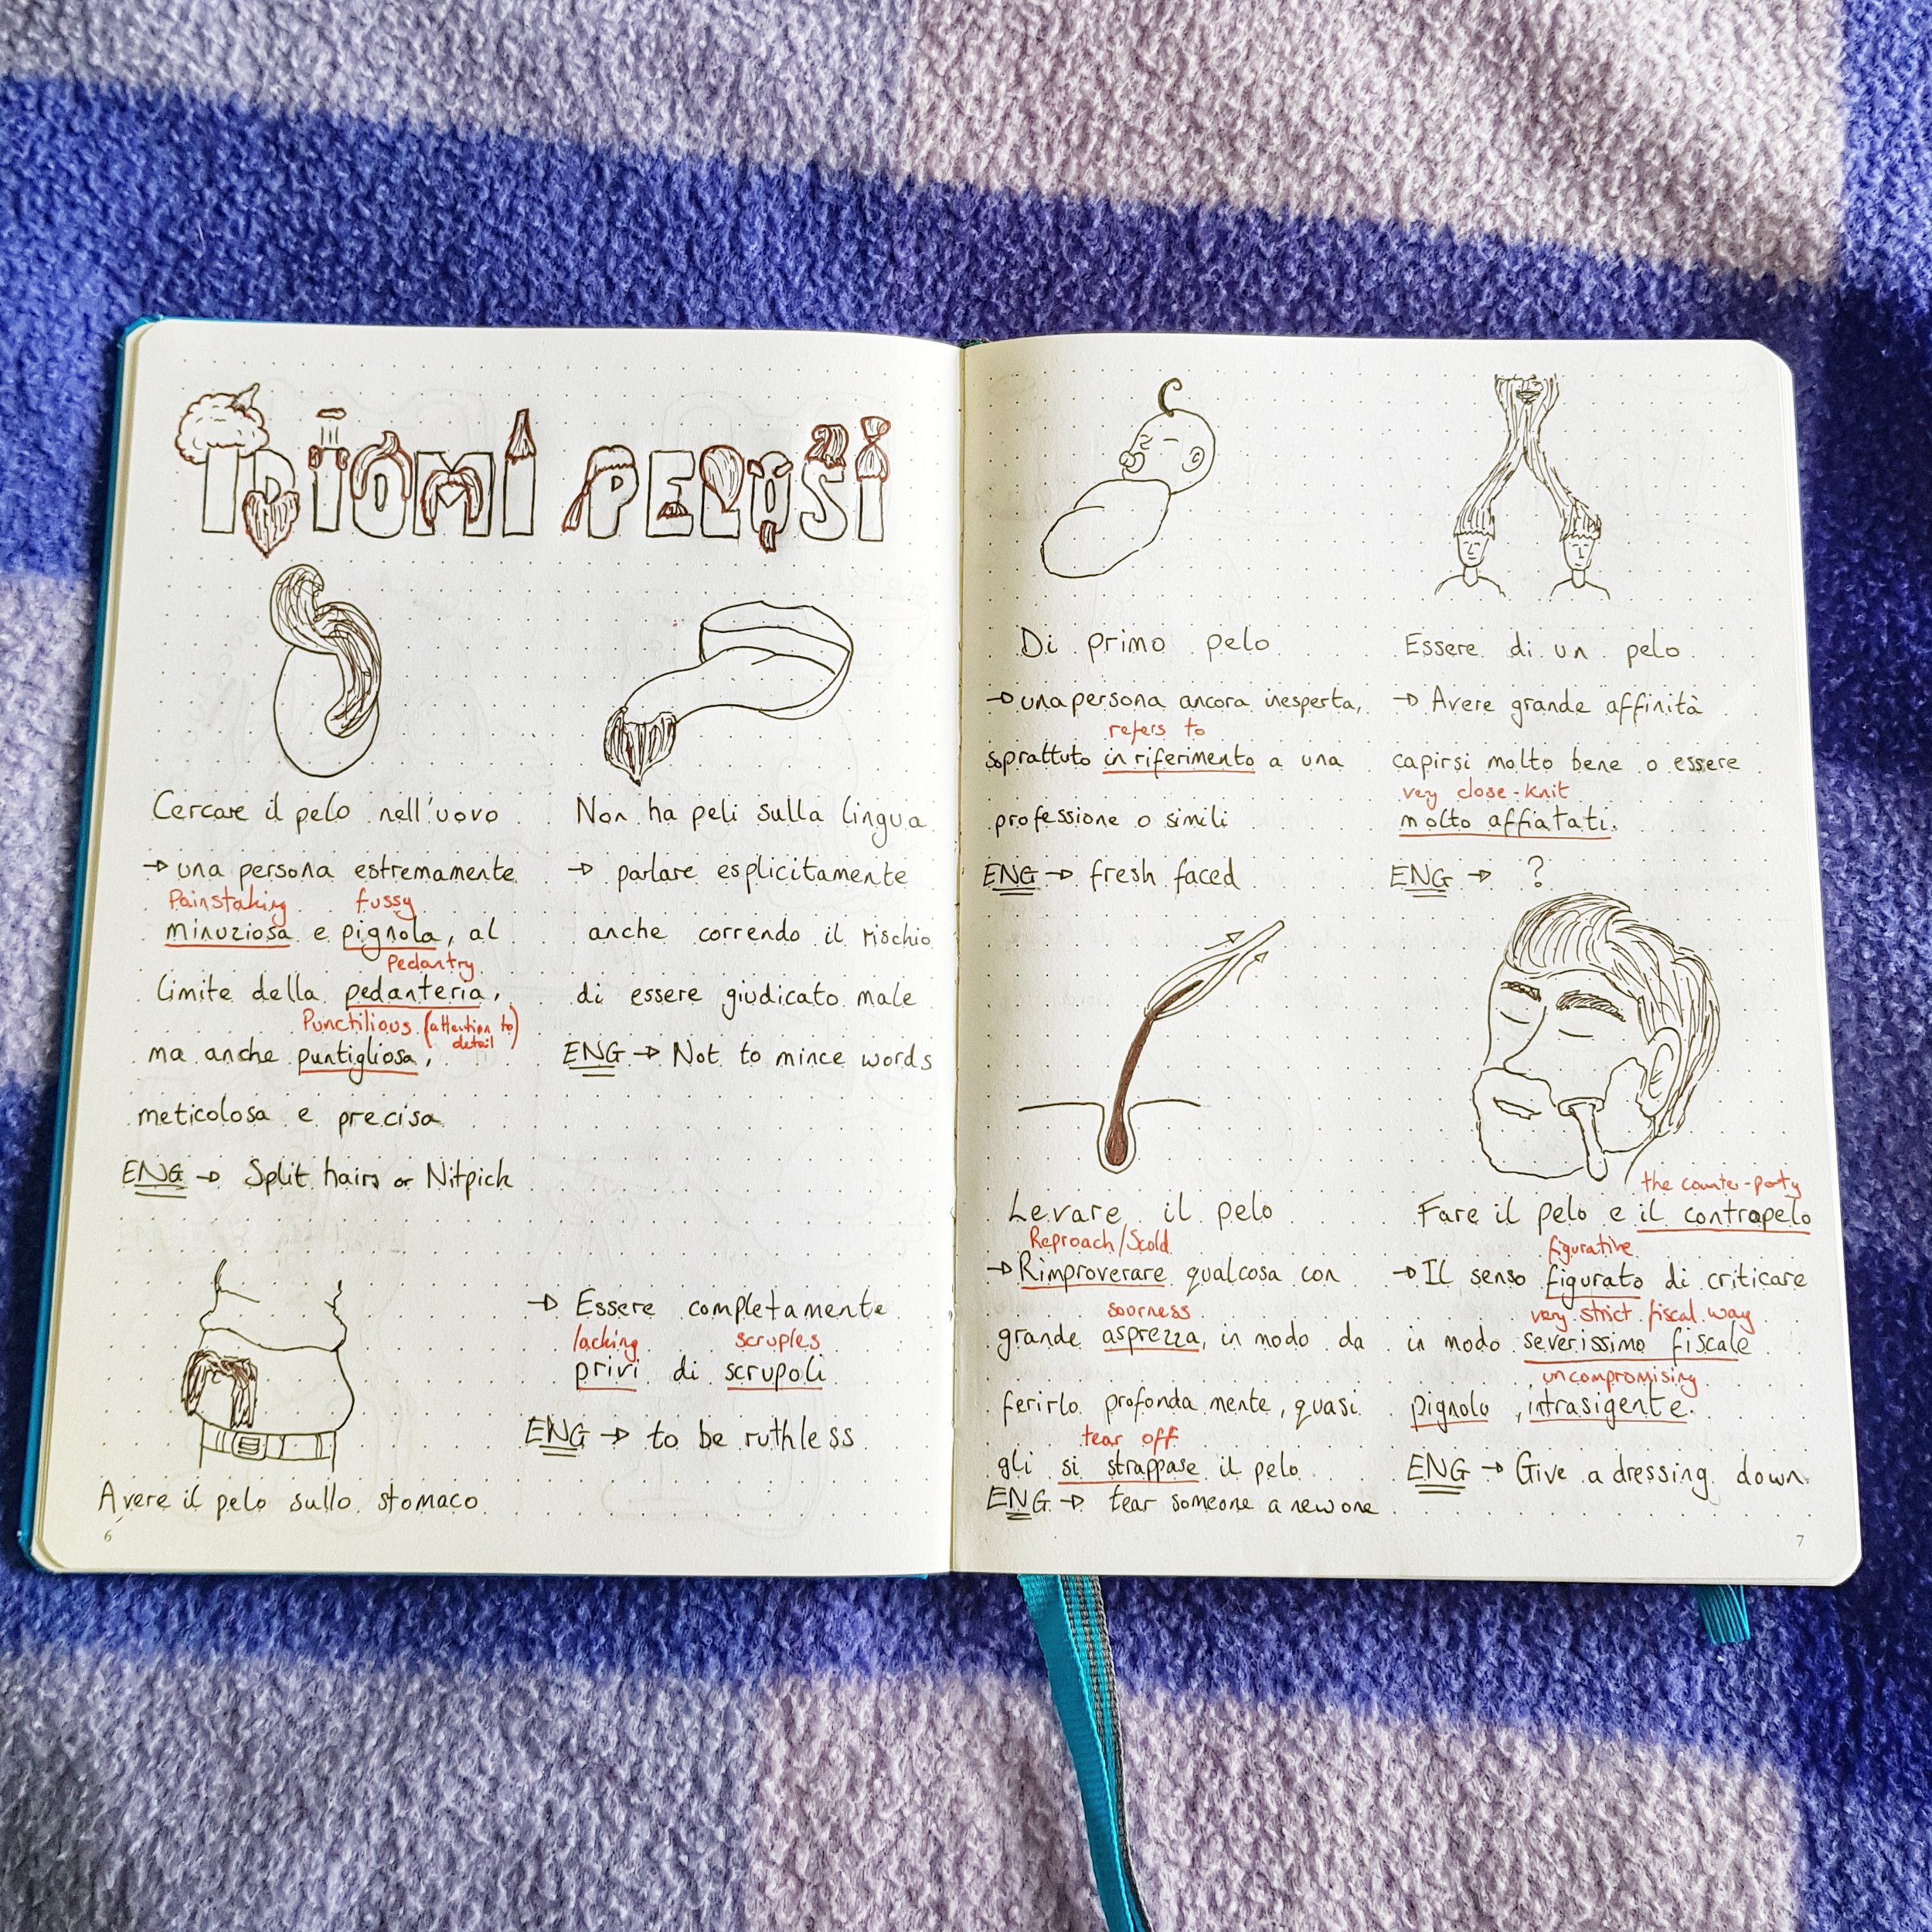 How To Create An Amazing Language Journal by Fluent Language